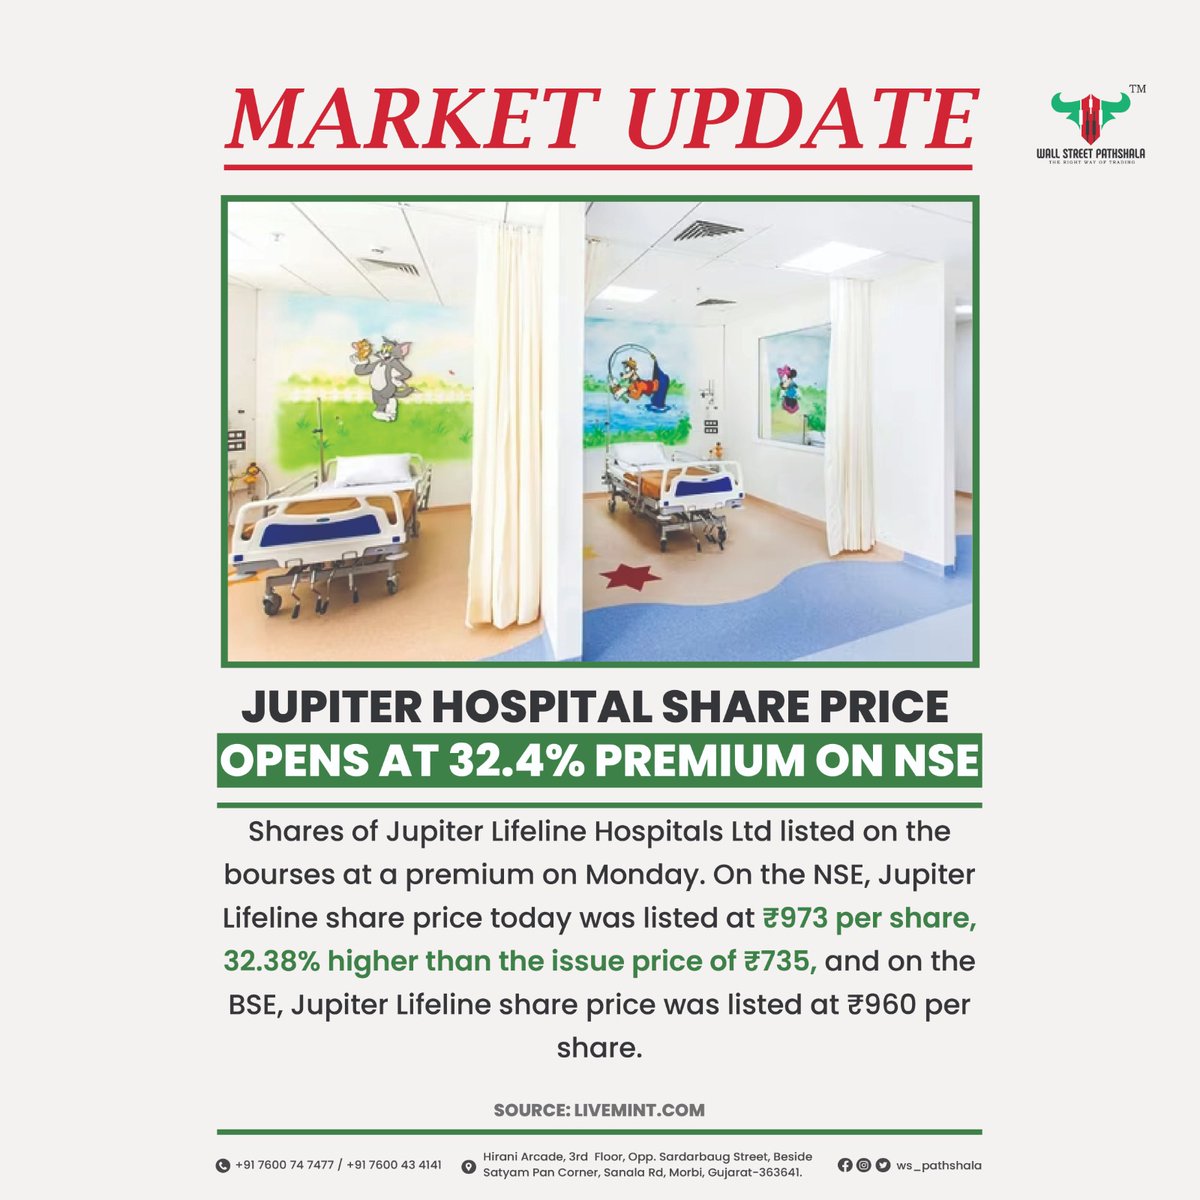 Stock Market Update: Jupiter Hospital Share Price Opens At A Premium Of 32.4% On NSE.

#ipo #jupiterhospital #jupiterlifeline #premium #listing #stockmarketindia #shareprice #stockmarketnews #bse #nse #sharemarket #trading #nifty #sensex #wallstreetpathshala #wsp #morbi #india